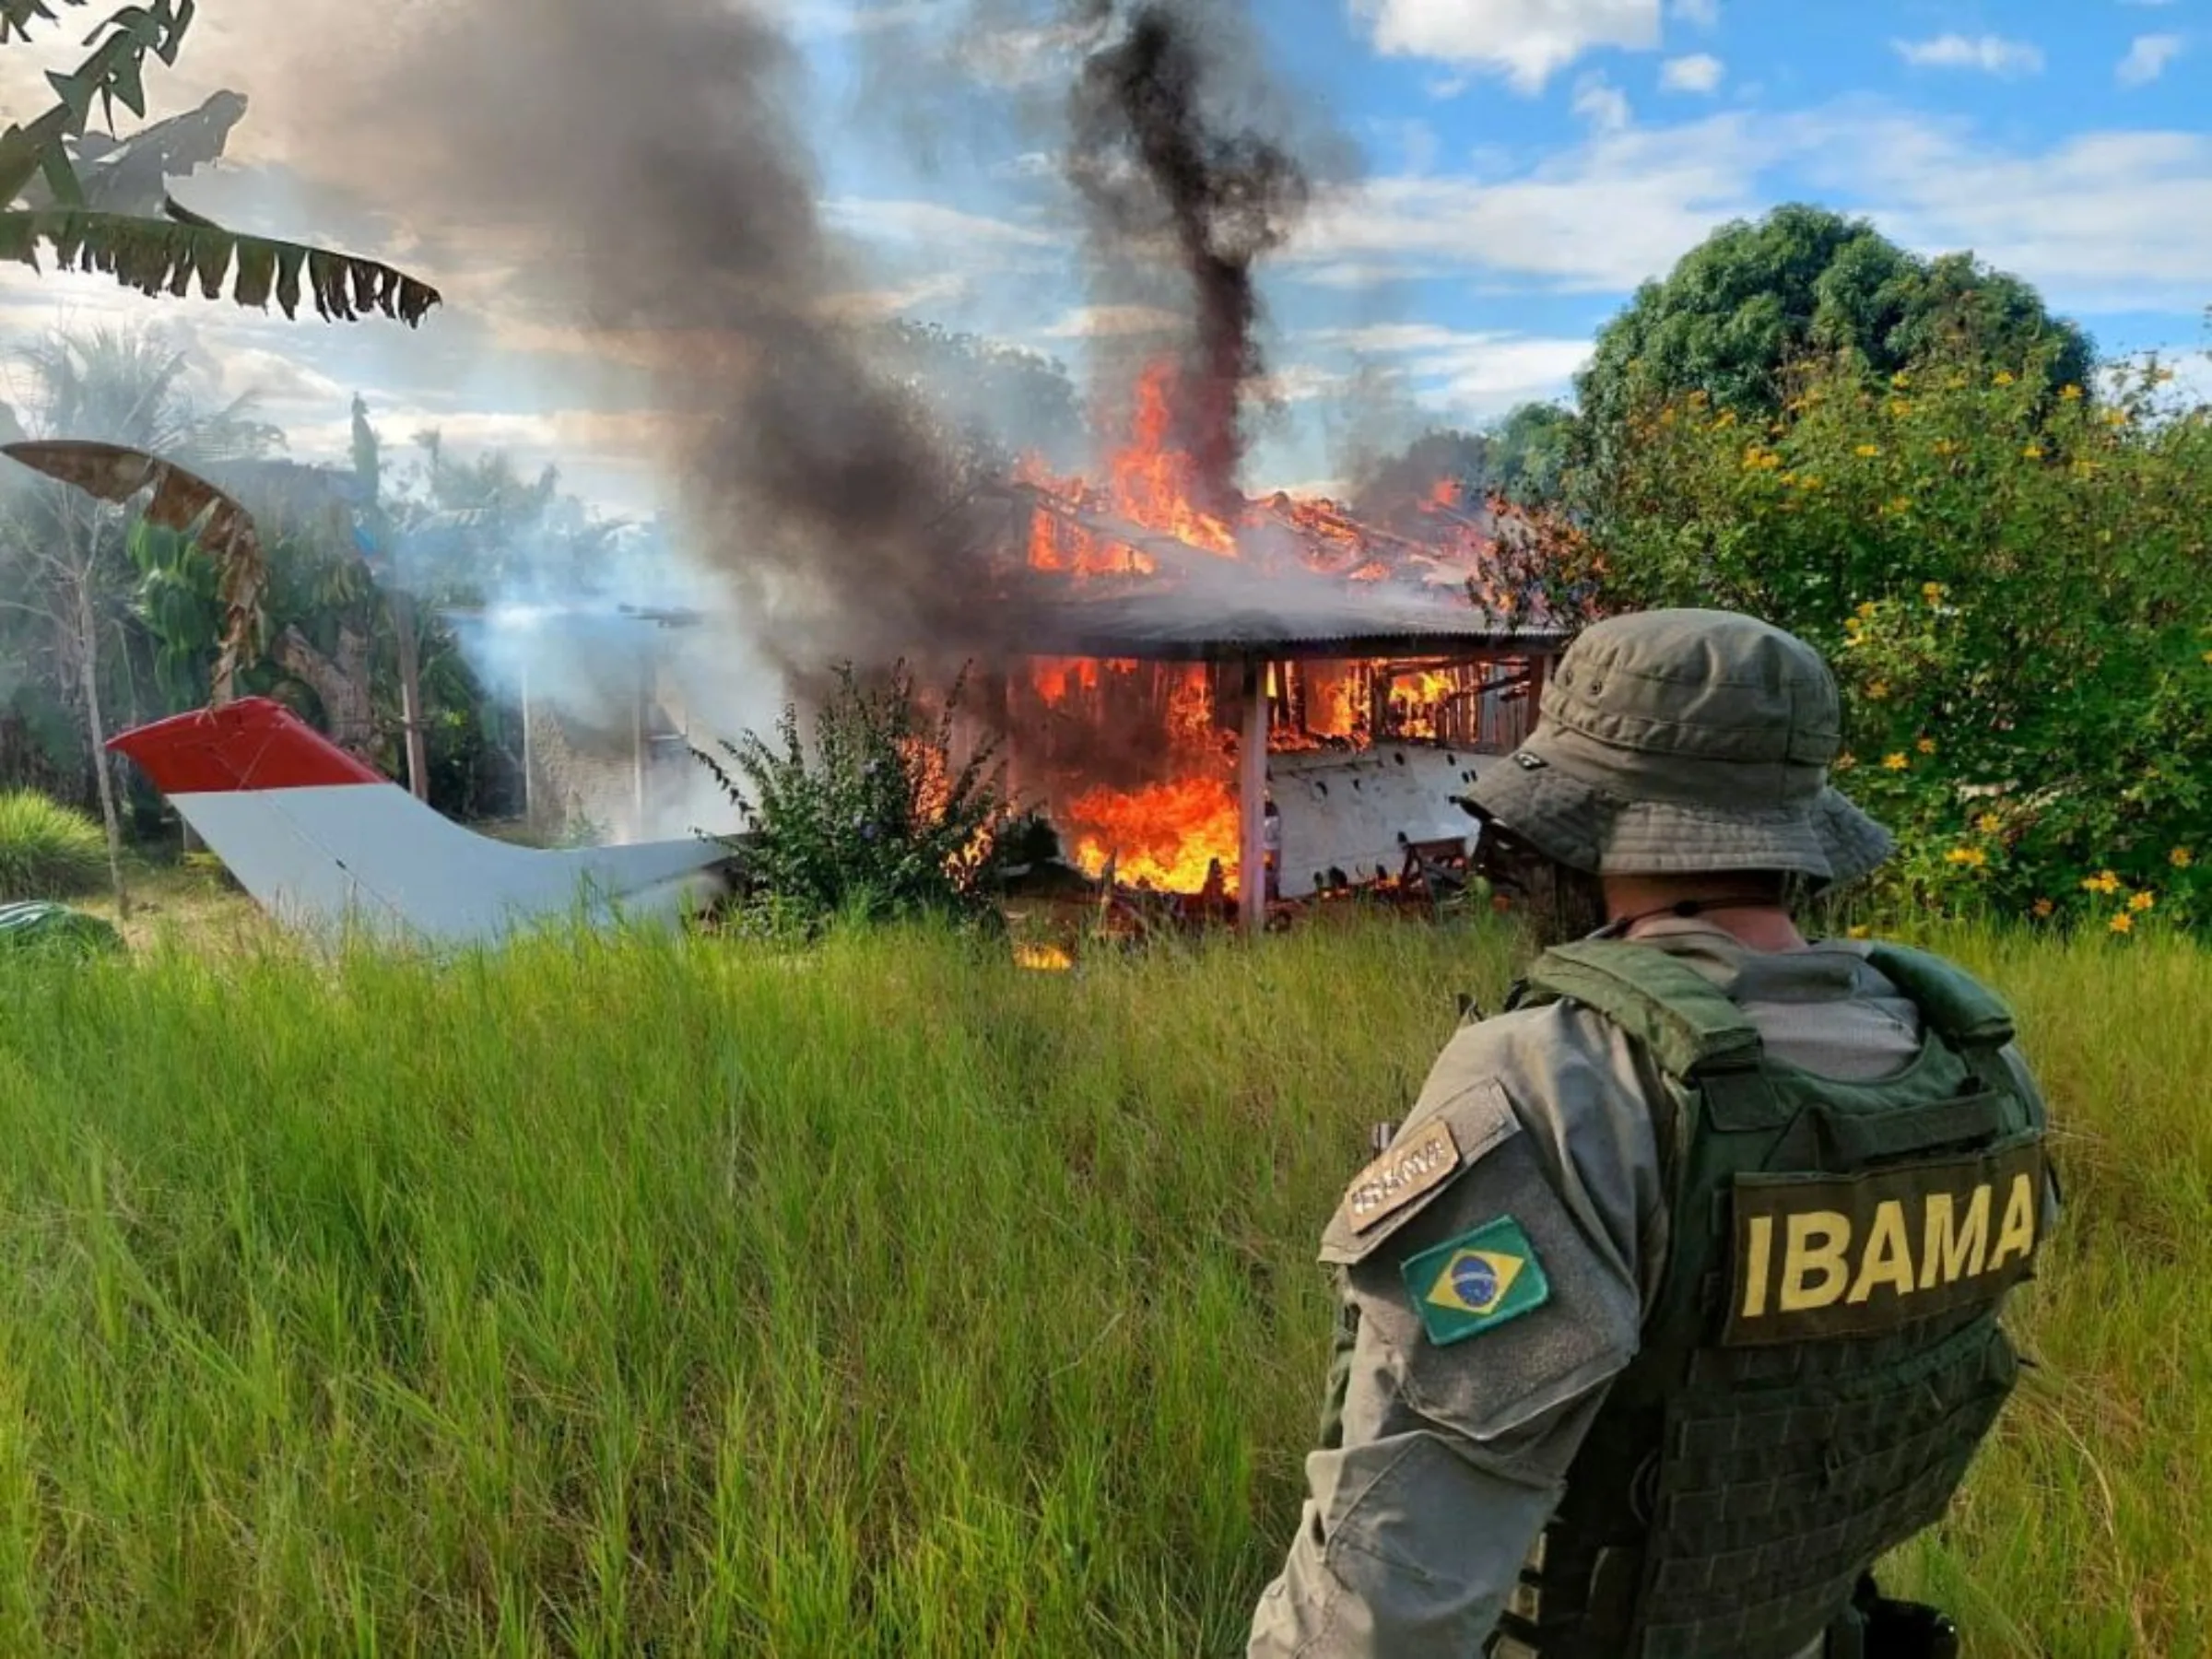 An agent of the Brazilian Institute for the Environment and Renewable Natural Resources (IBAMA), looks on as a plane and a house belonging to miners are destroyed during an operation conducted jointly within Brazil's National Indian Foundation (FUNAI) and Brazilian National Public Security Force against illegal mining in Yanomami indigenous land in Roraima state, Brazil February 6, 2023